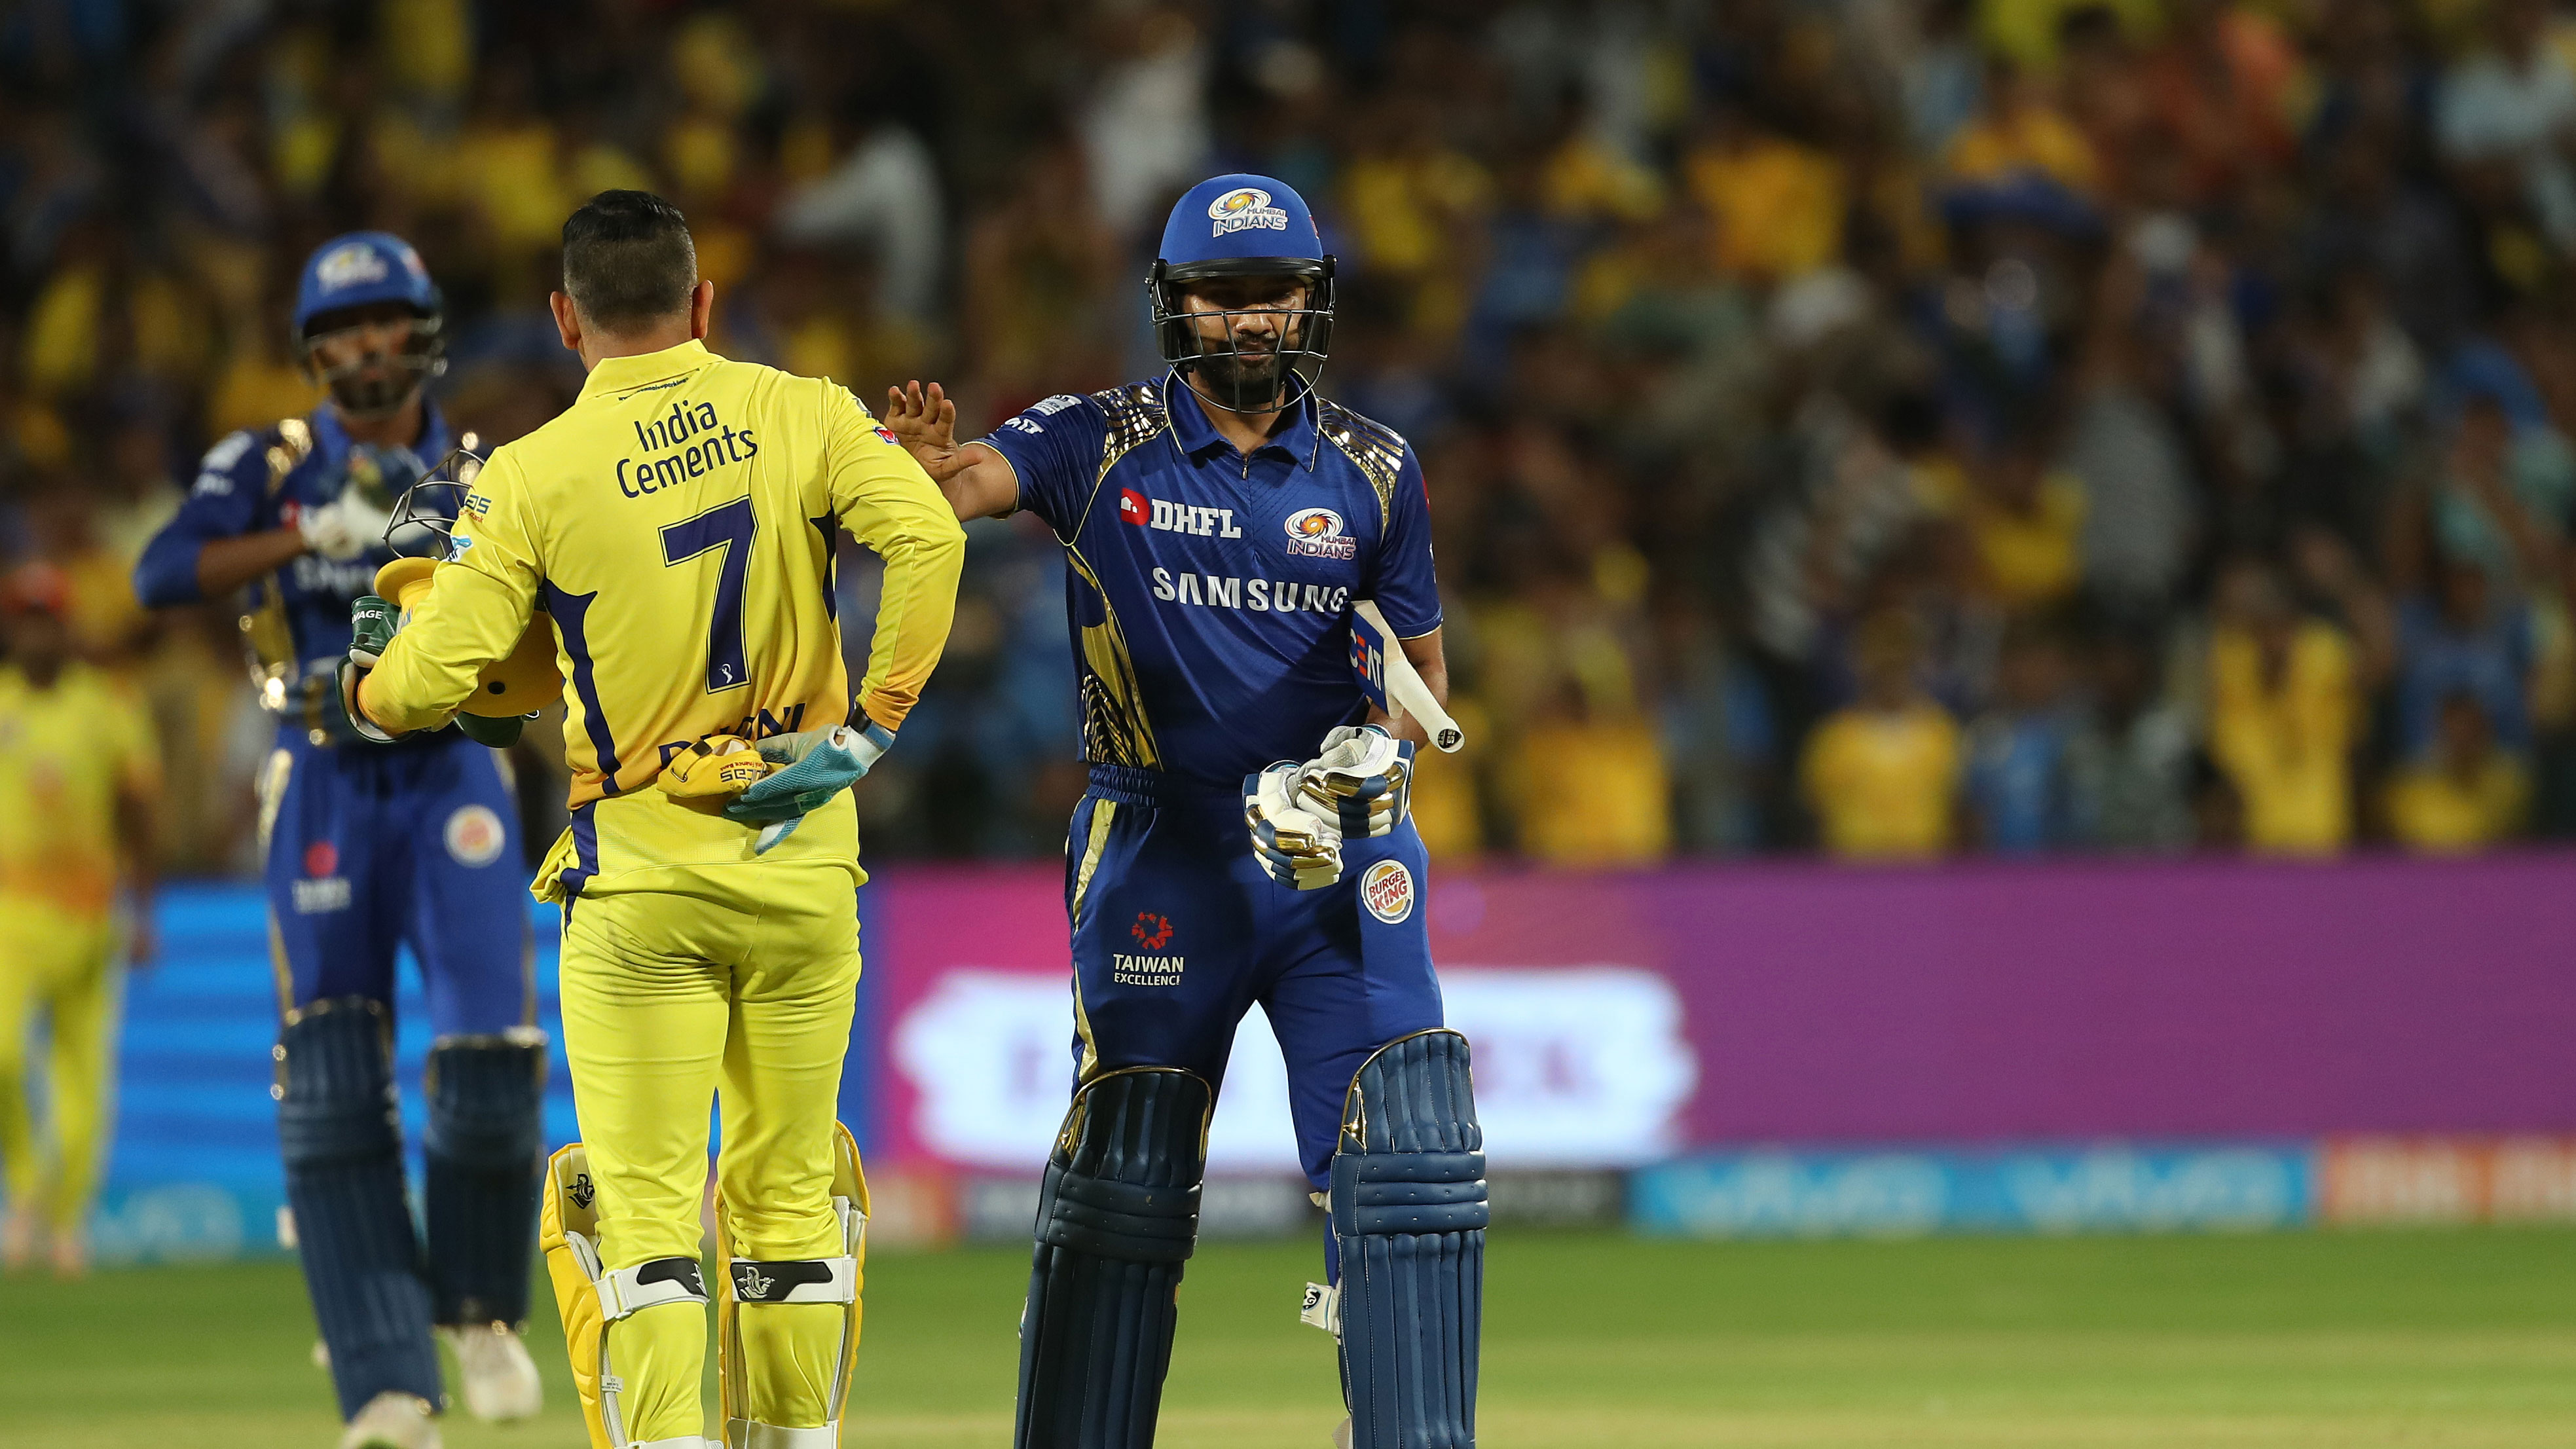 A Glimpse Of All The Mumbai Indians vs Chennai Super Kings IPL Finals 6